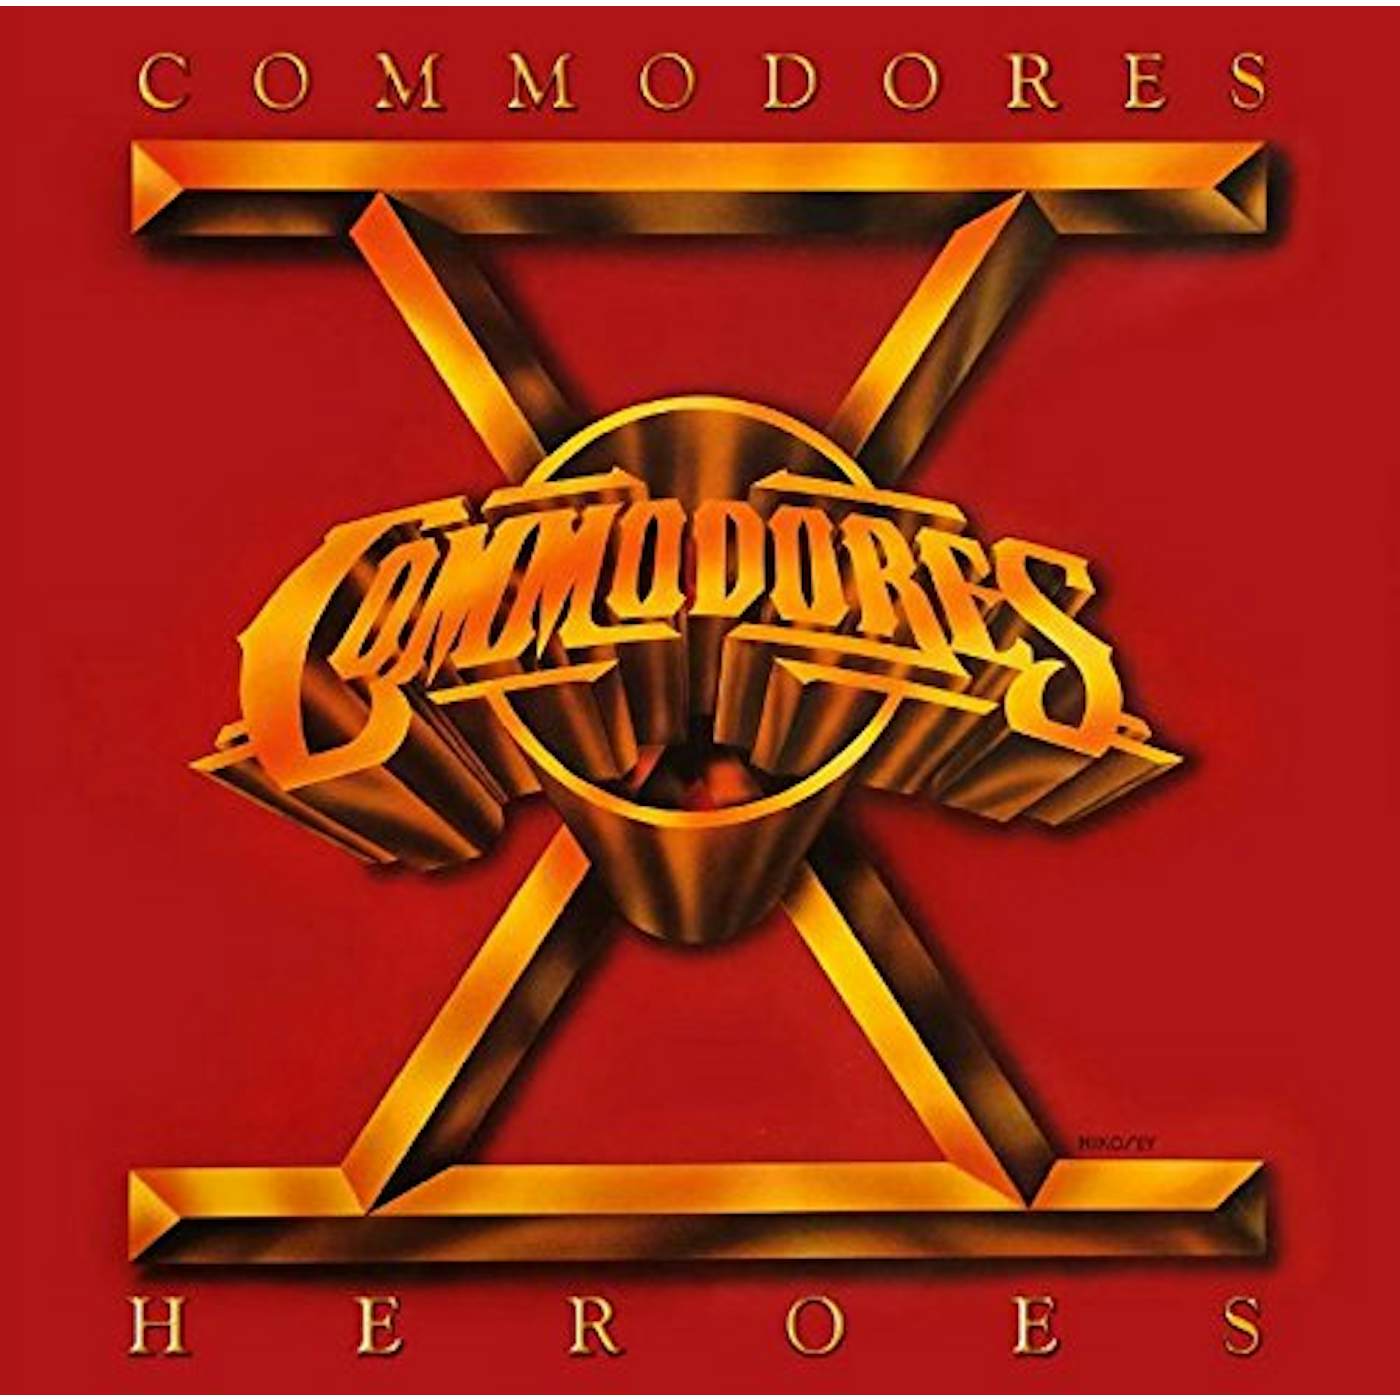 Commodores HEROES CD